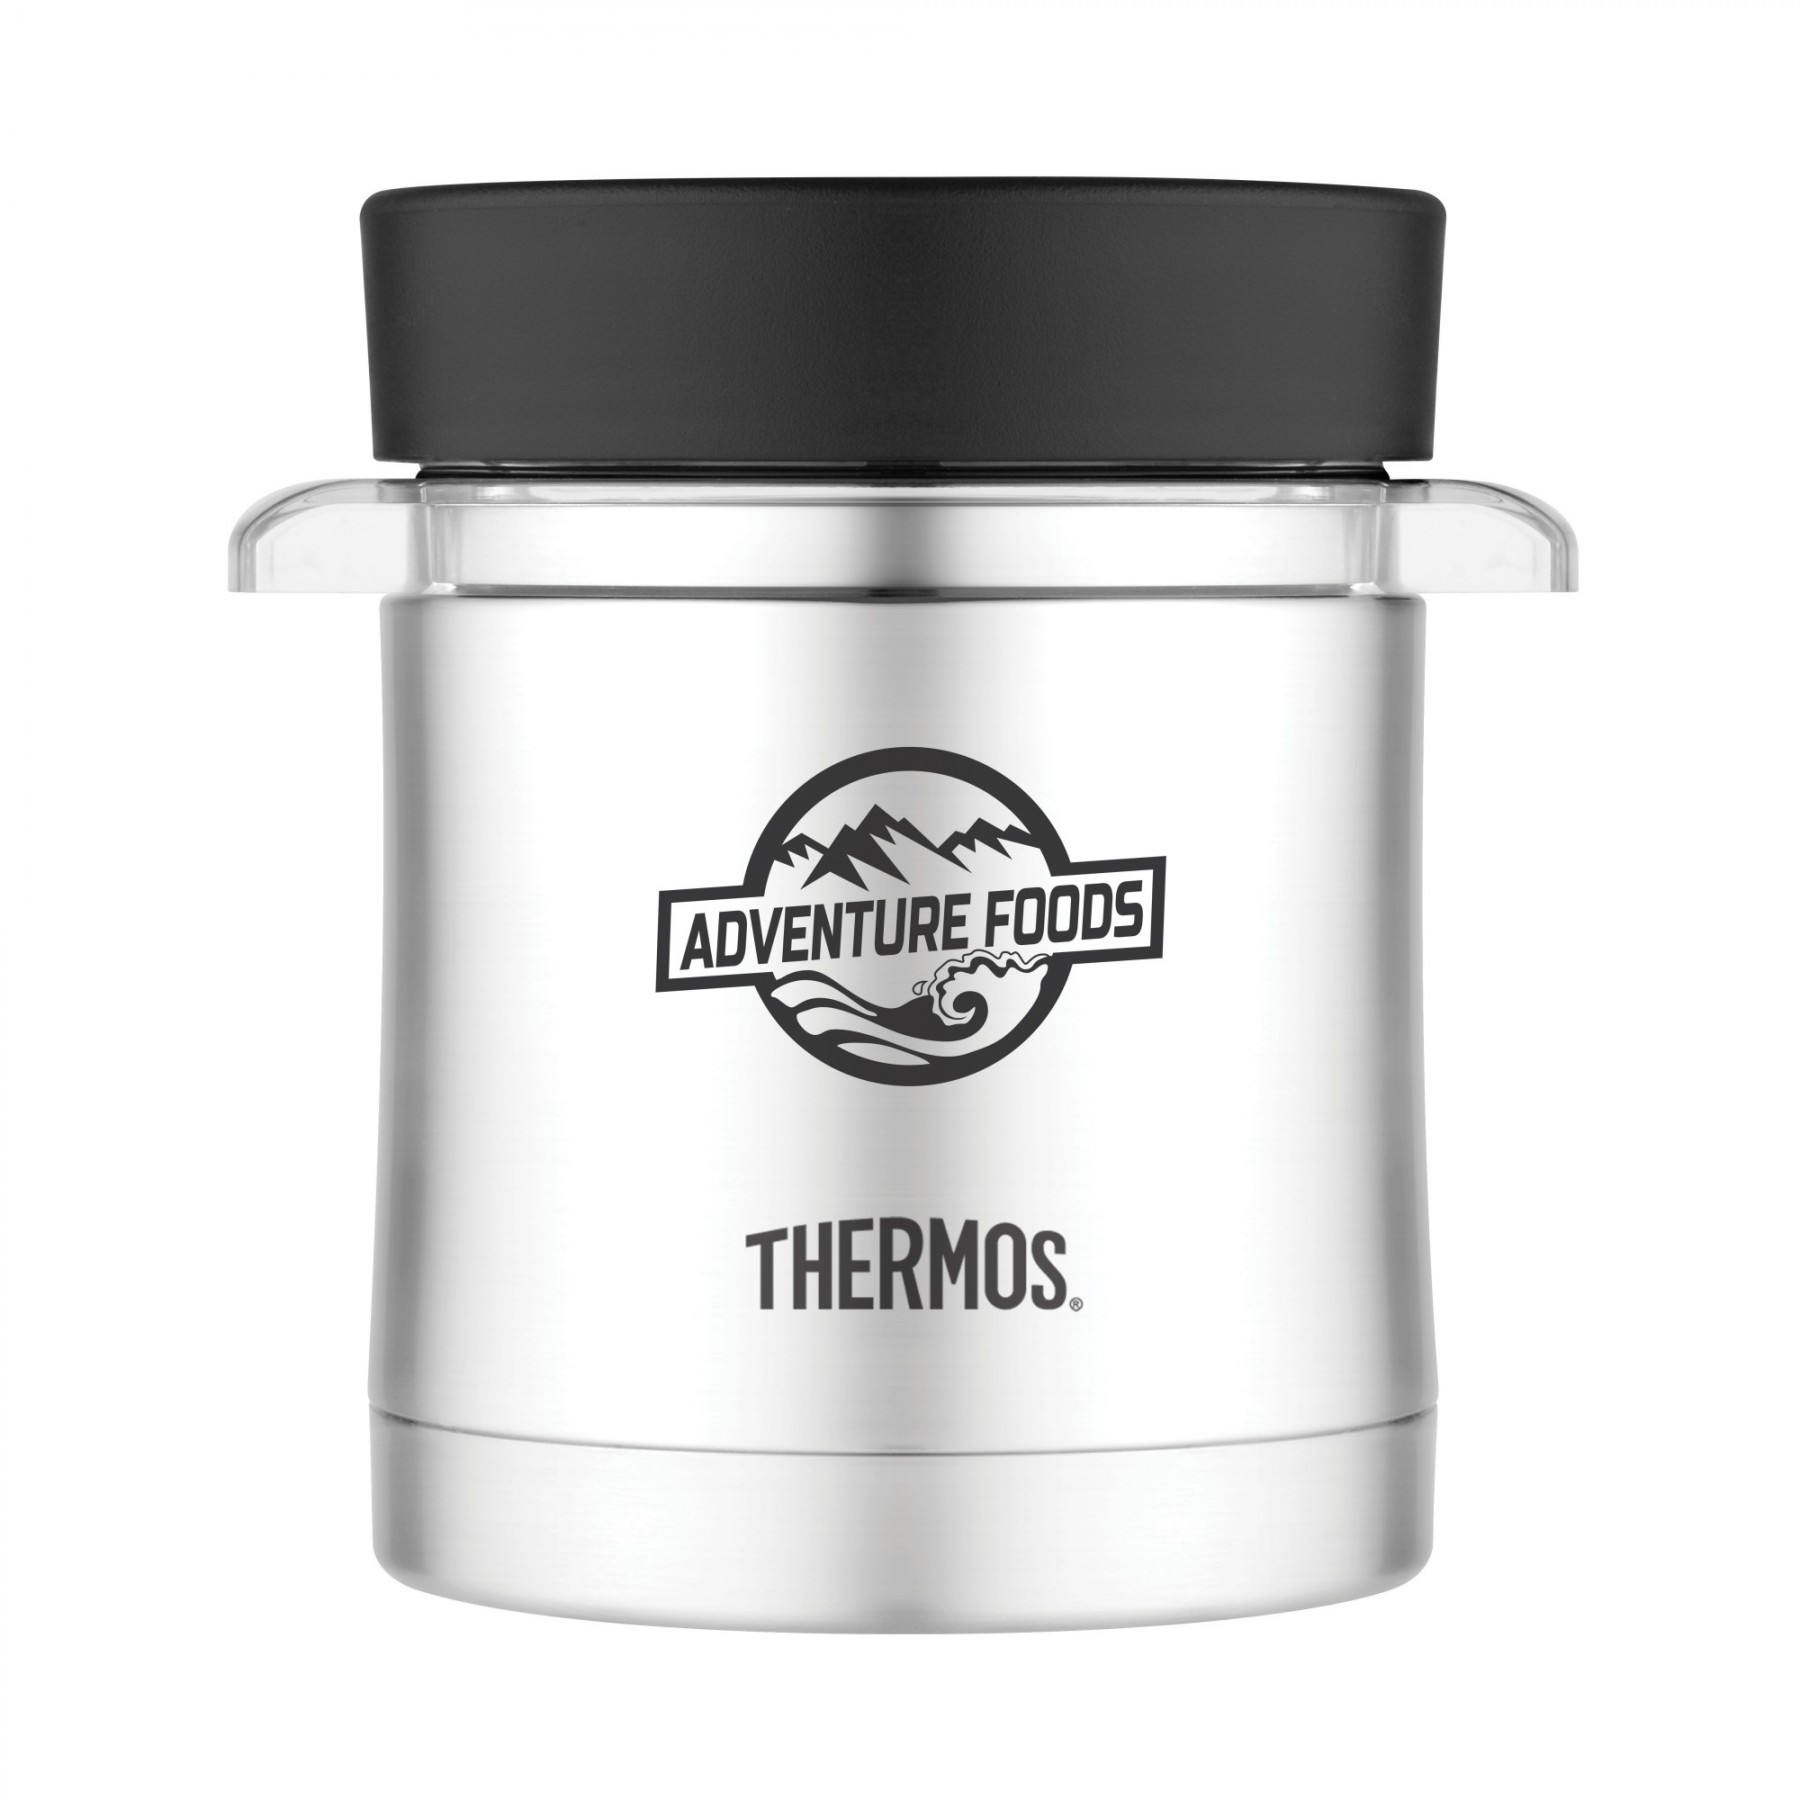 Thermos Food Jar with Microwavable Container - 12 Oz.